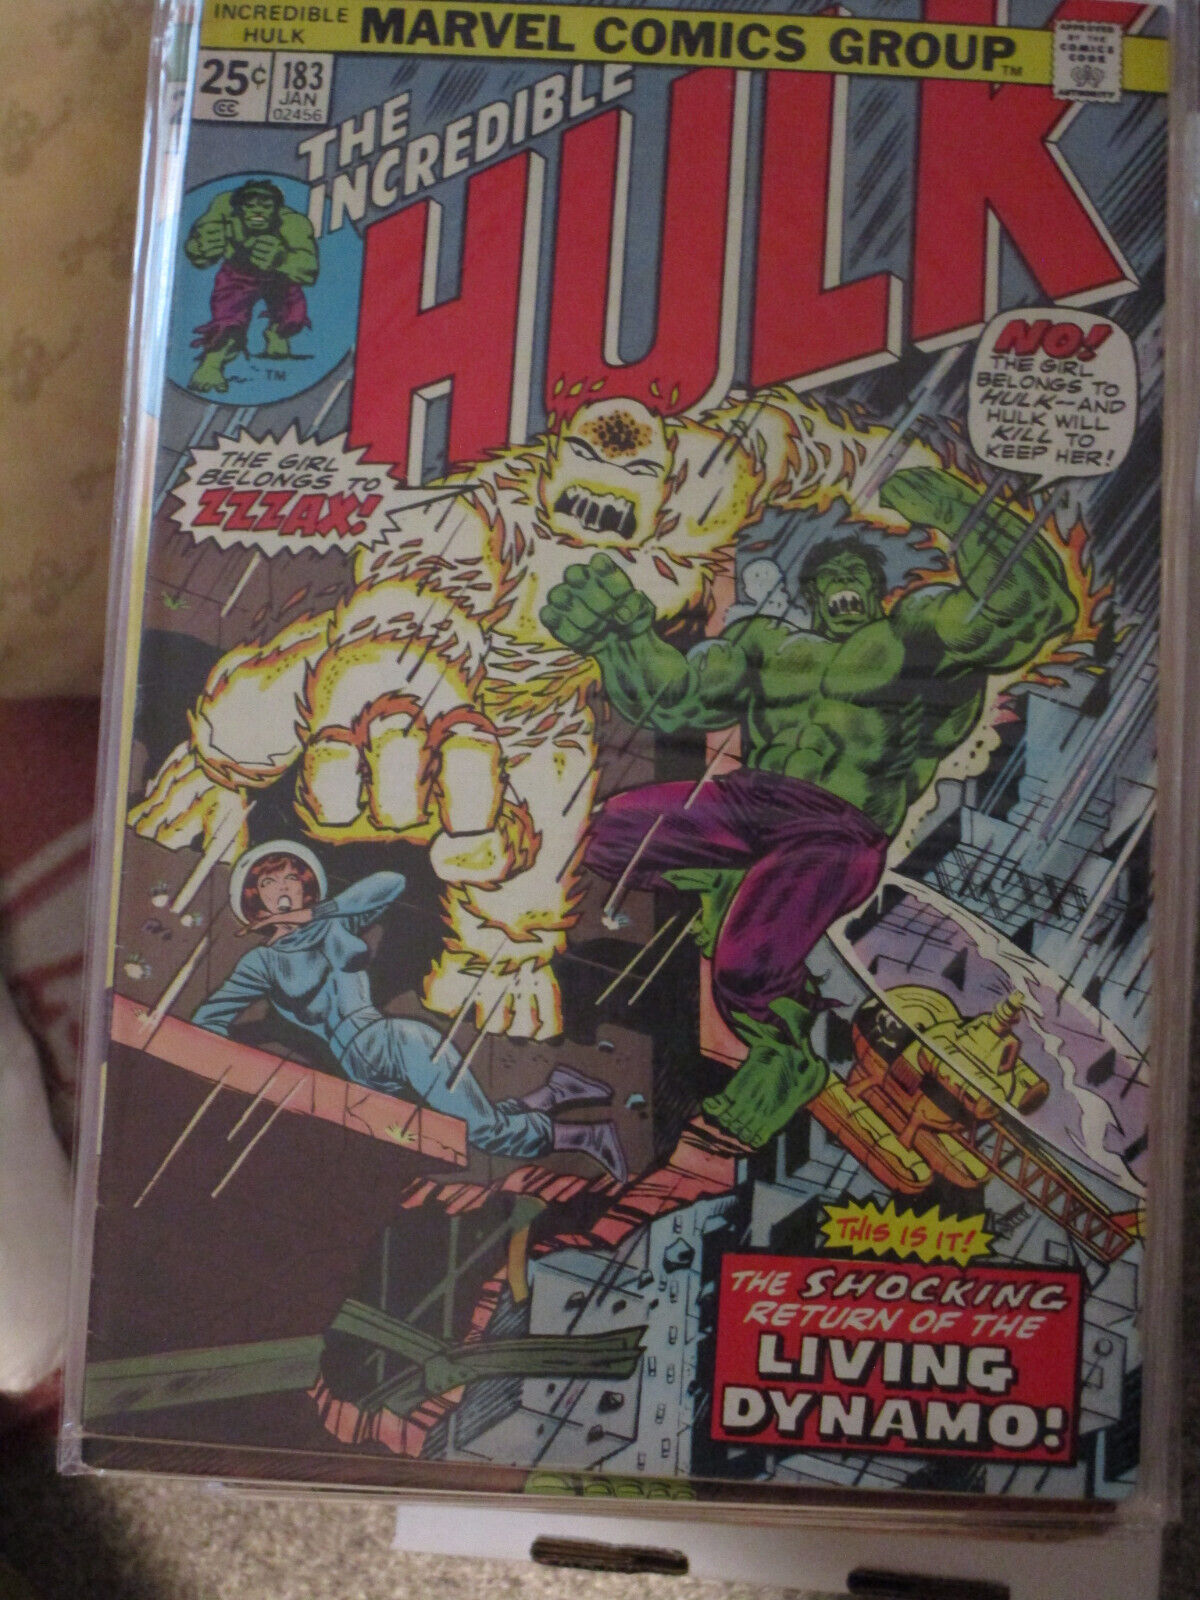 The Incredible Hulk Comics select an issue